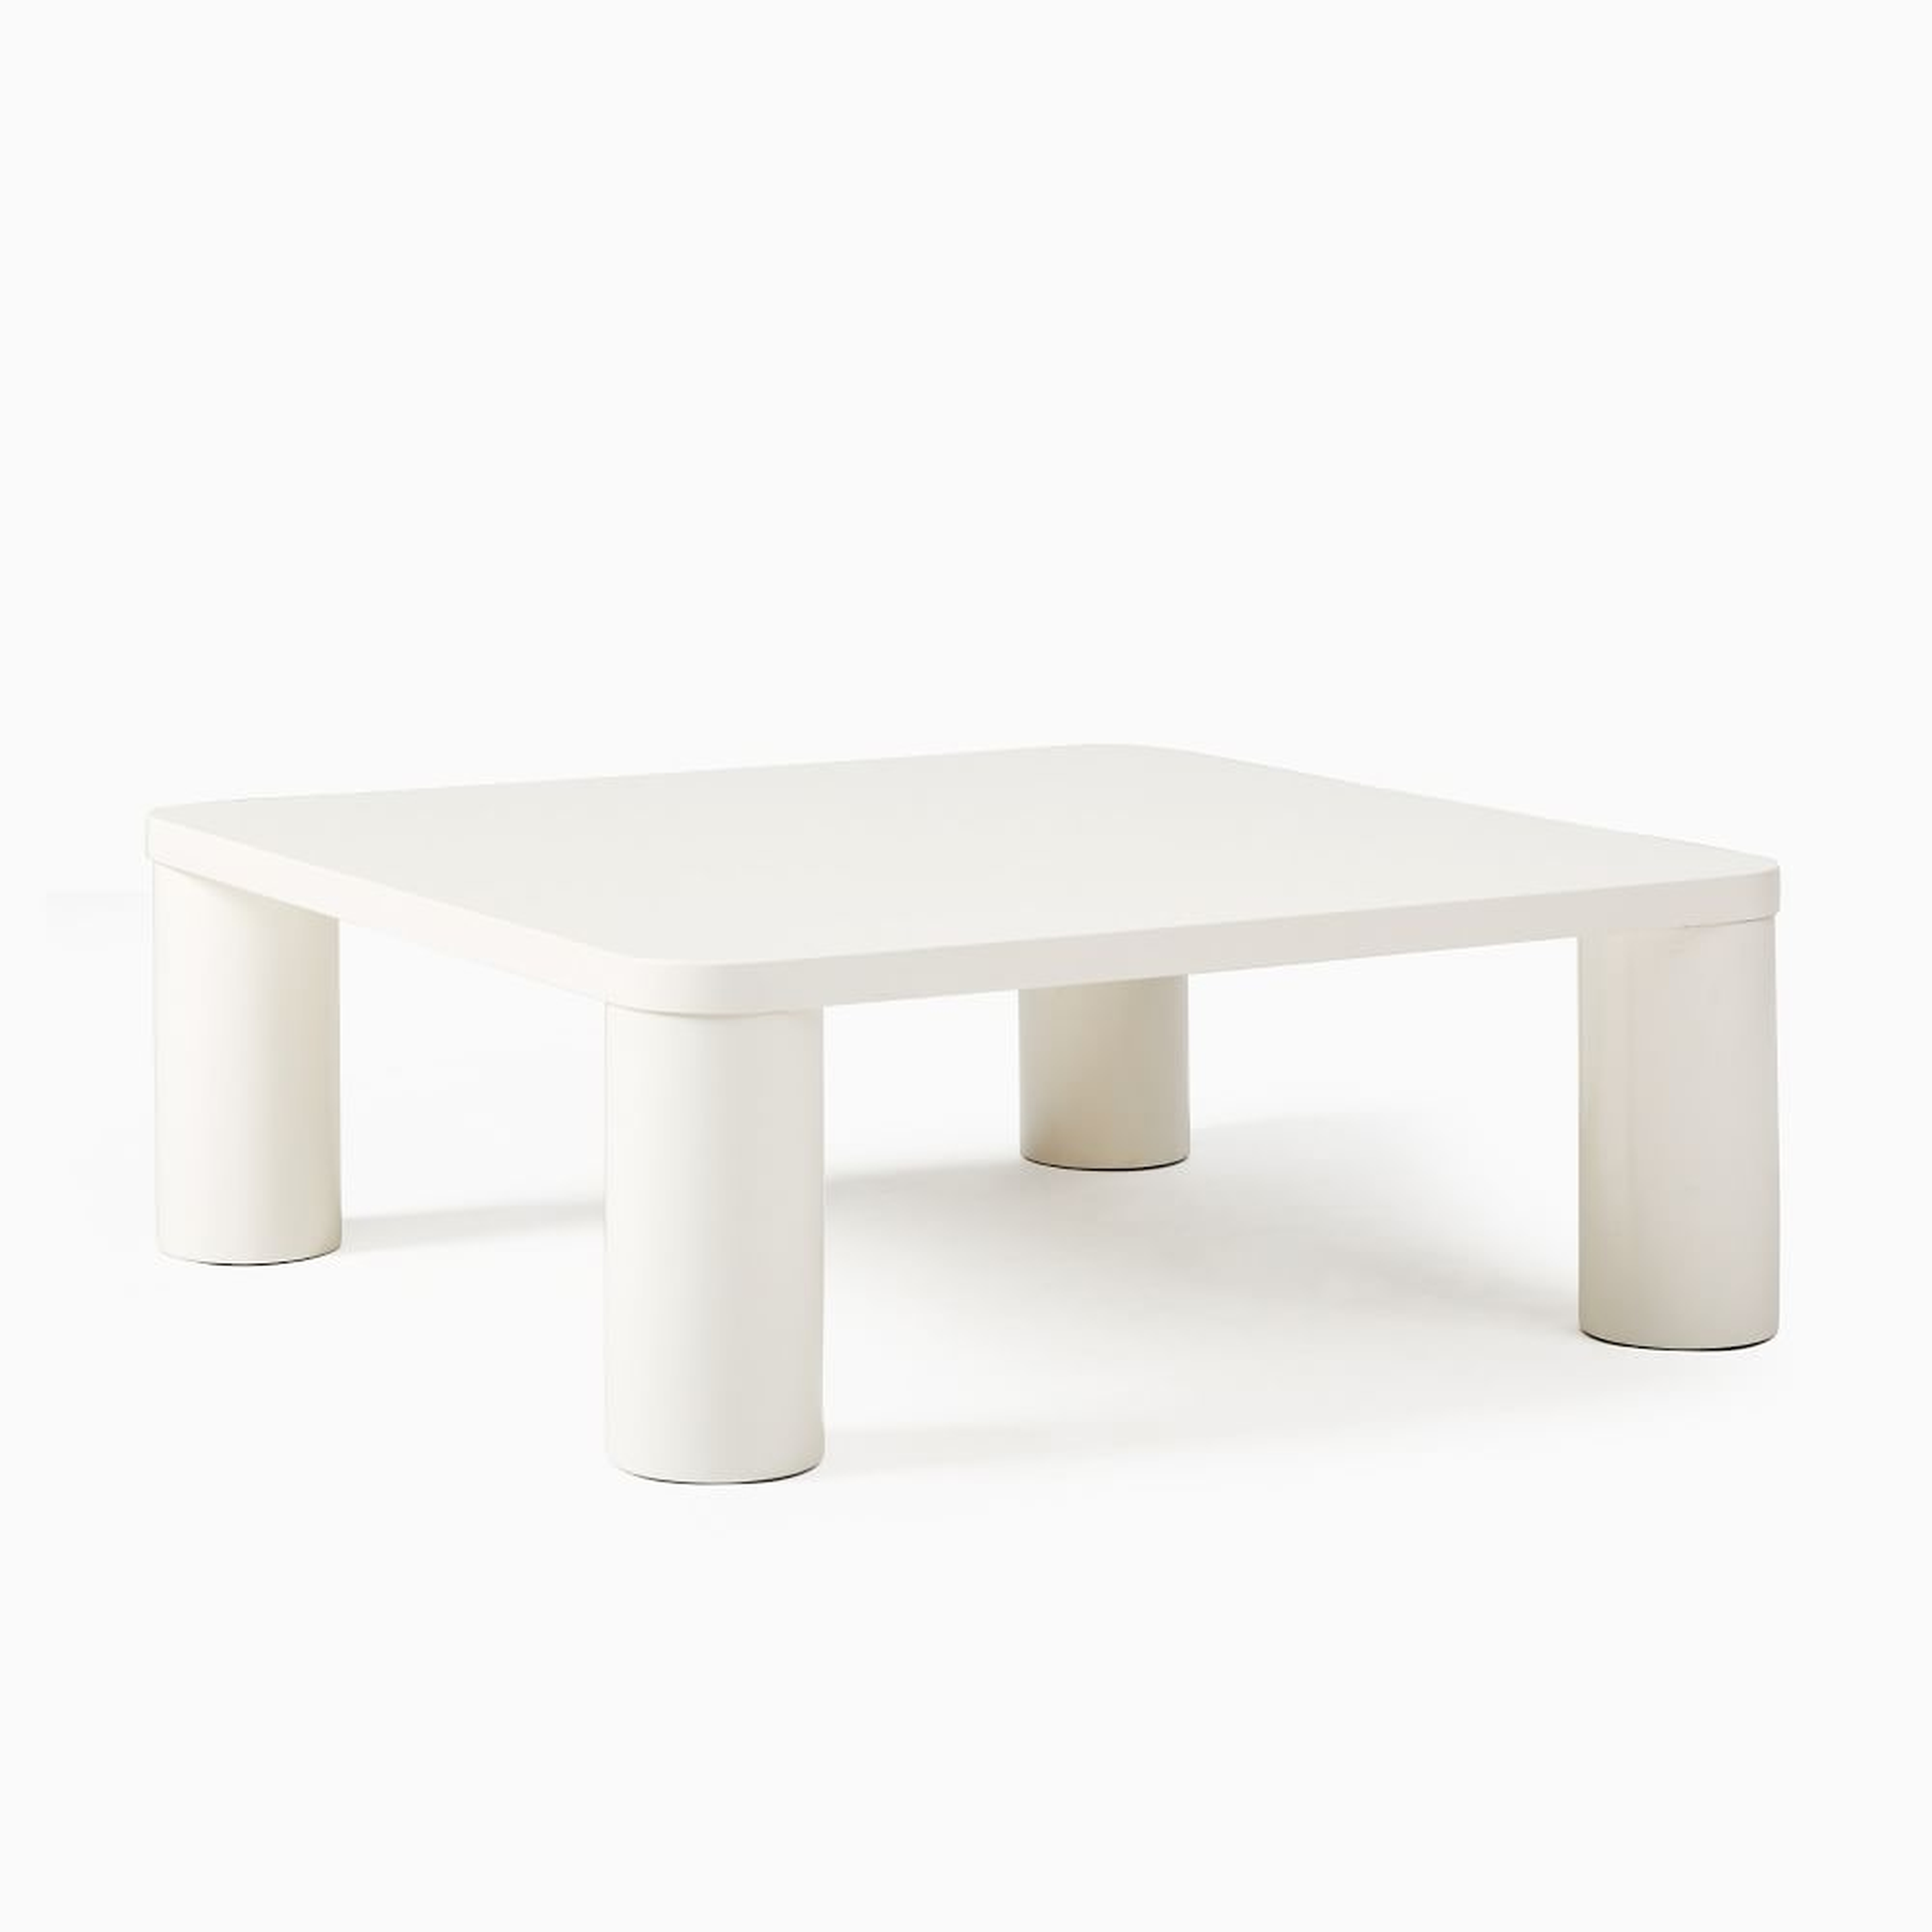 Hazel 36" Sq. Coffee Table, White Lacquer - West Elm